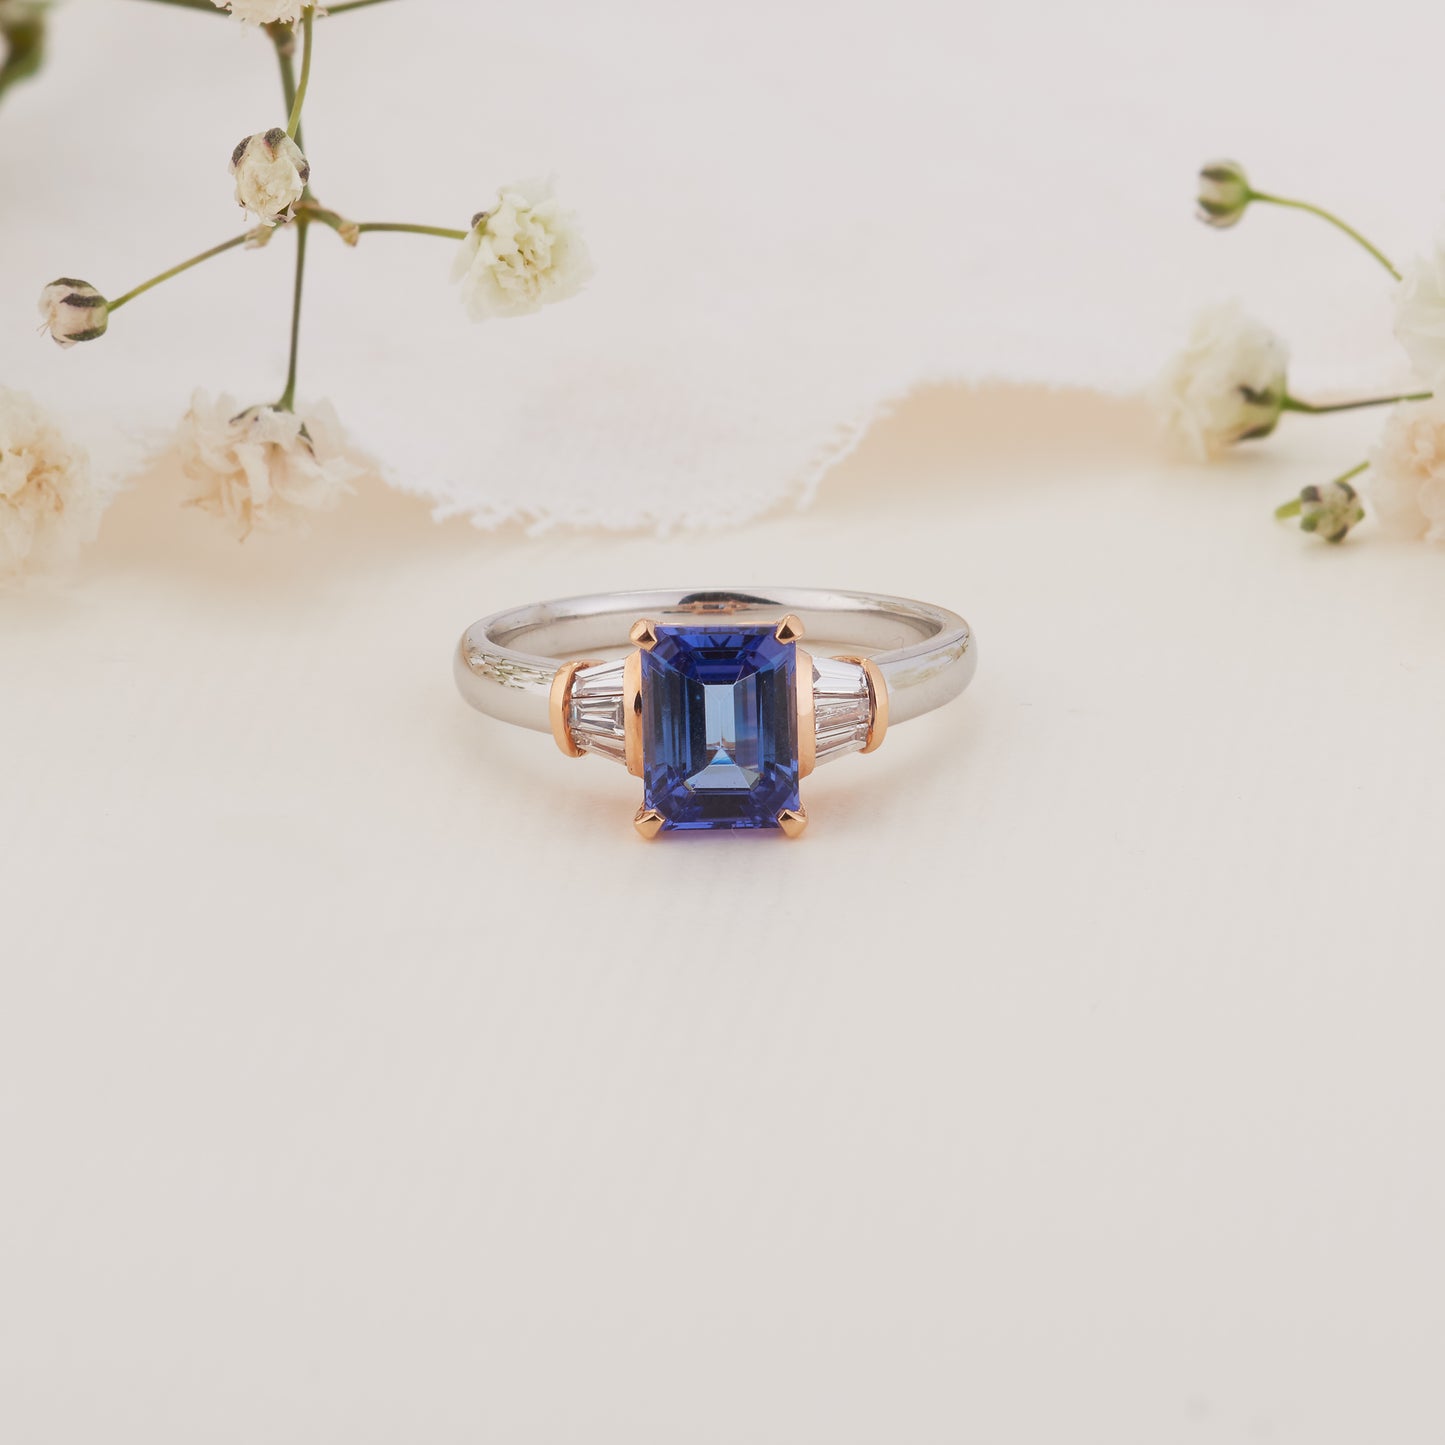 18K White and Rose Gold Emerald Cut Tanzanite and Baguette Diamond Ring 0.2tdw